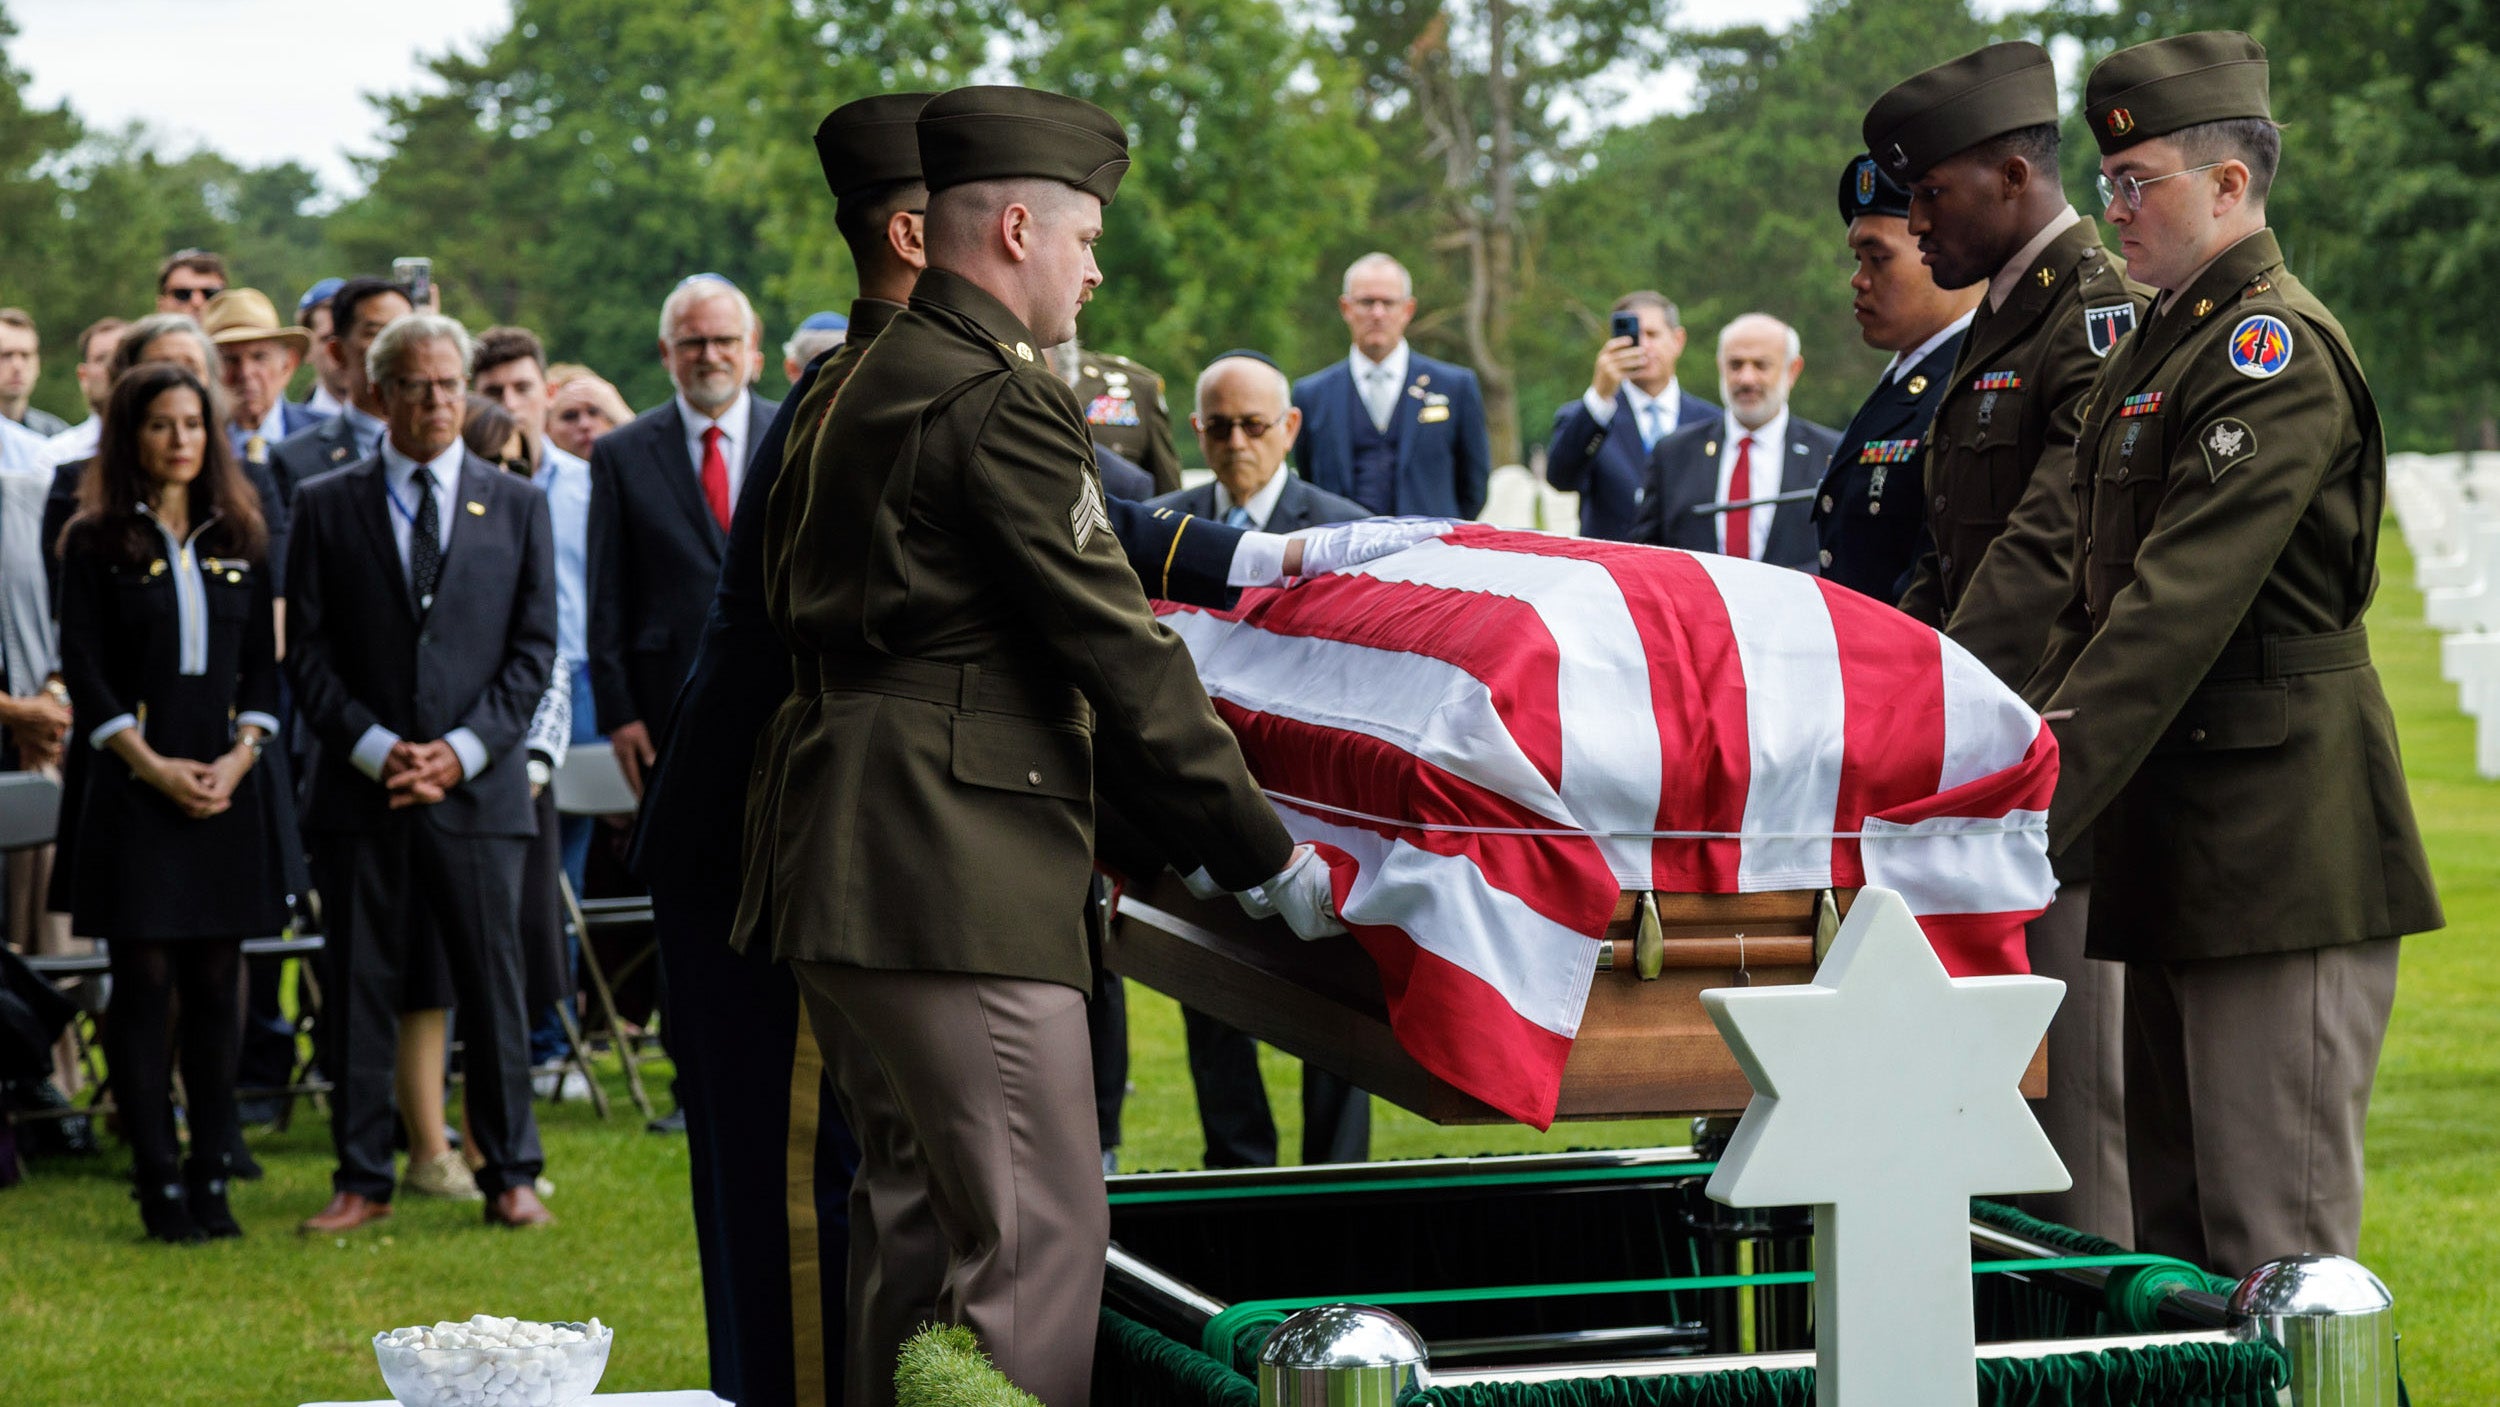 Members of the 56th Artillery Command, U.S. Army Europe and Africa, carry 1st Lt. Nathan B. Baskind’s casket at Normandy American Cemetery, France. ©Julien Nguyen-Kim/ABMC